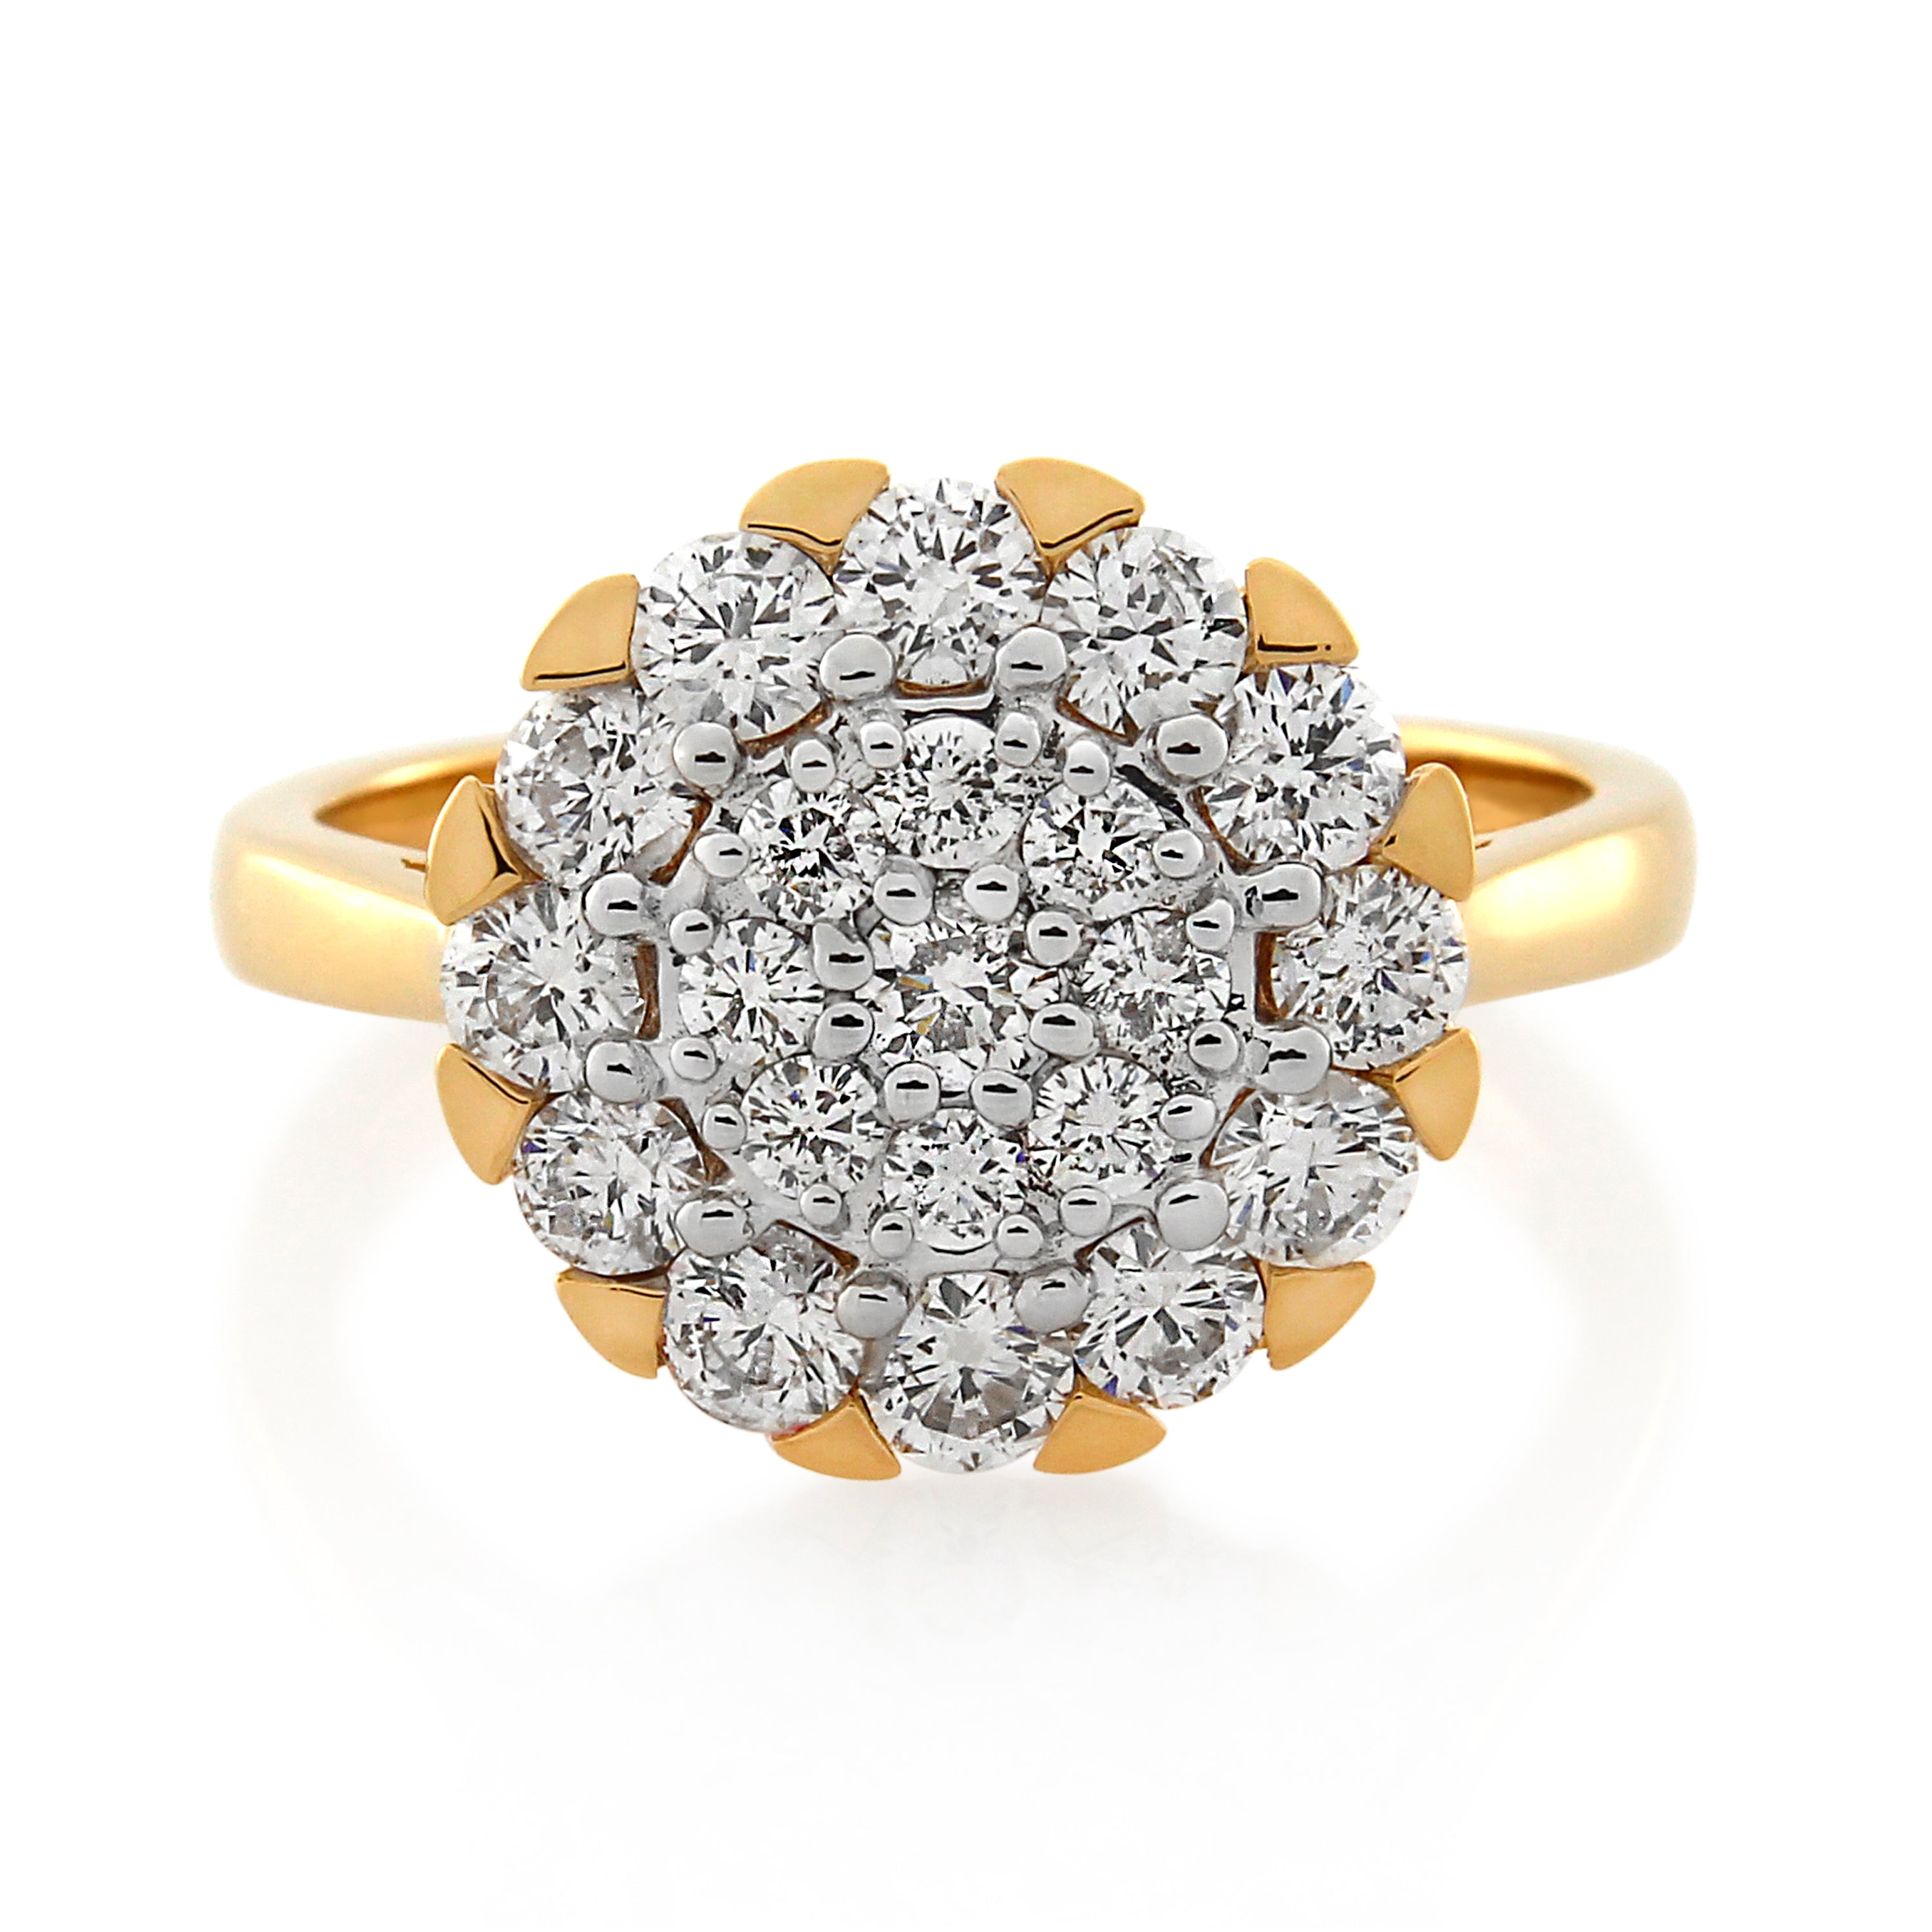 18ct Yellow Gold Diamond Fancy Cluster Ring 1.11ct TW